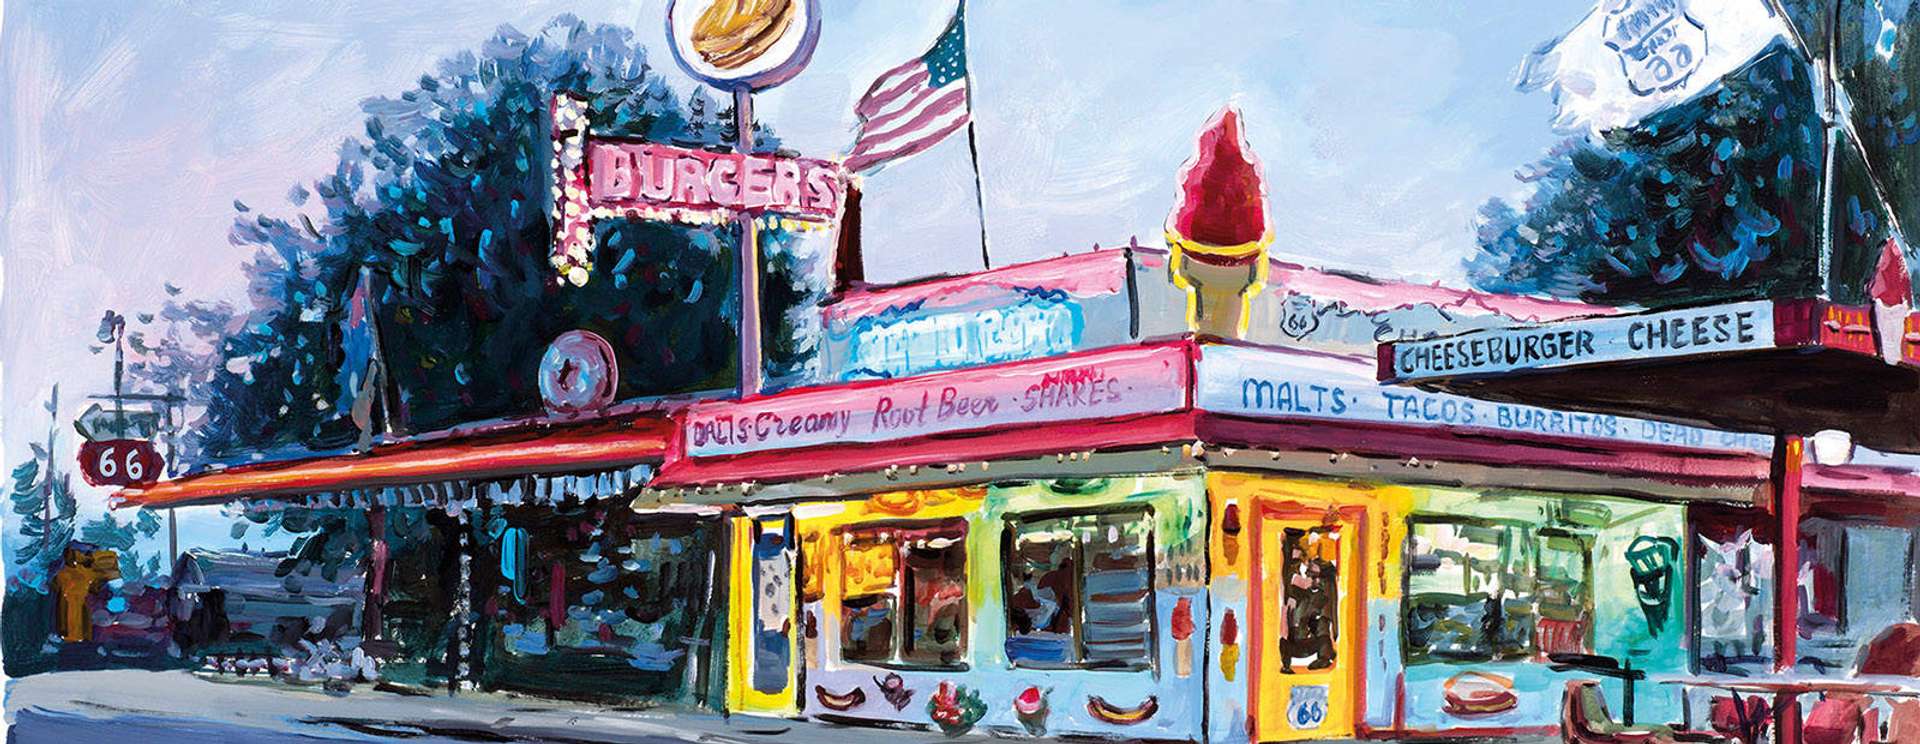 A painting by artist Bob Dylan, depicting an all-American gas station. It also shows a burger joint, advertising cheeseburgers and rootbeer. An American flag si atop the building.